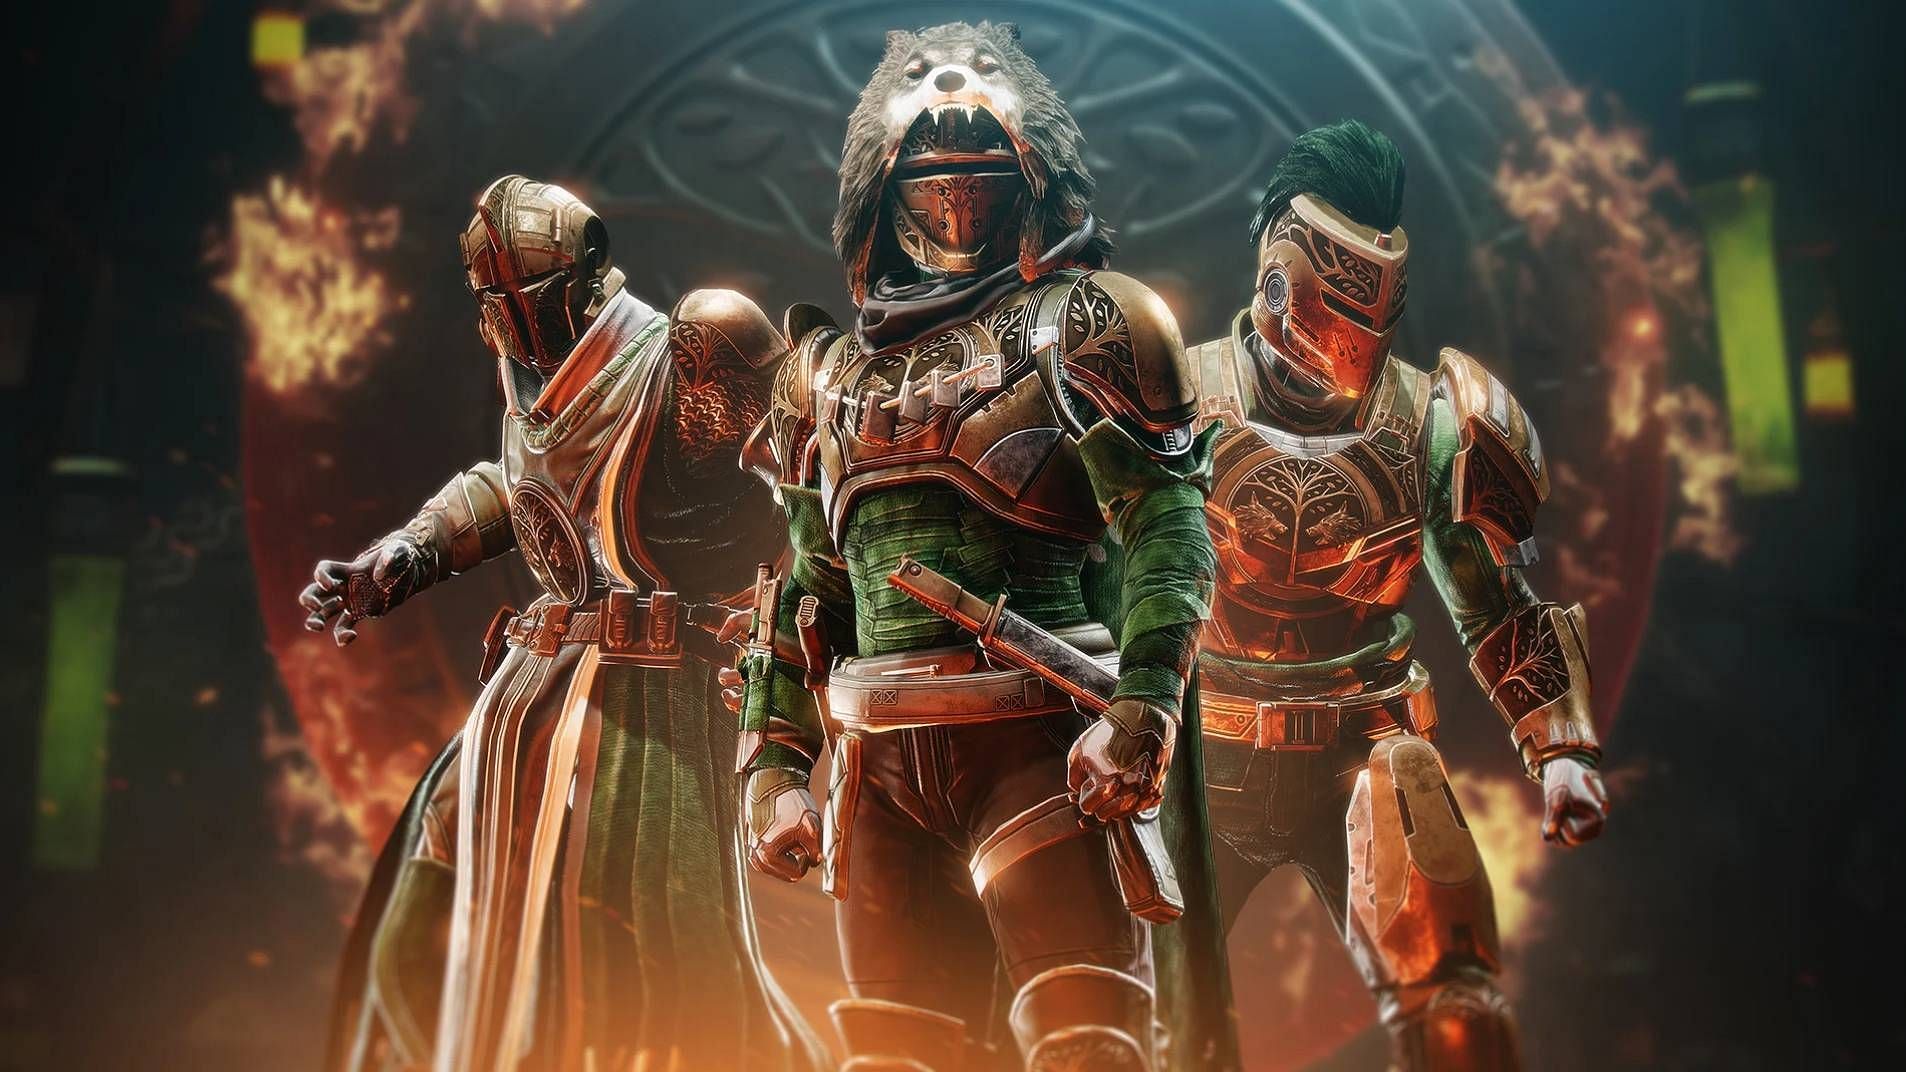 Iron Banner armor sets in Destiny 2 (Image via Bungie)